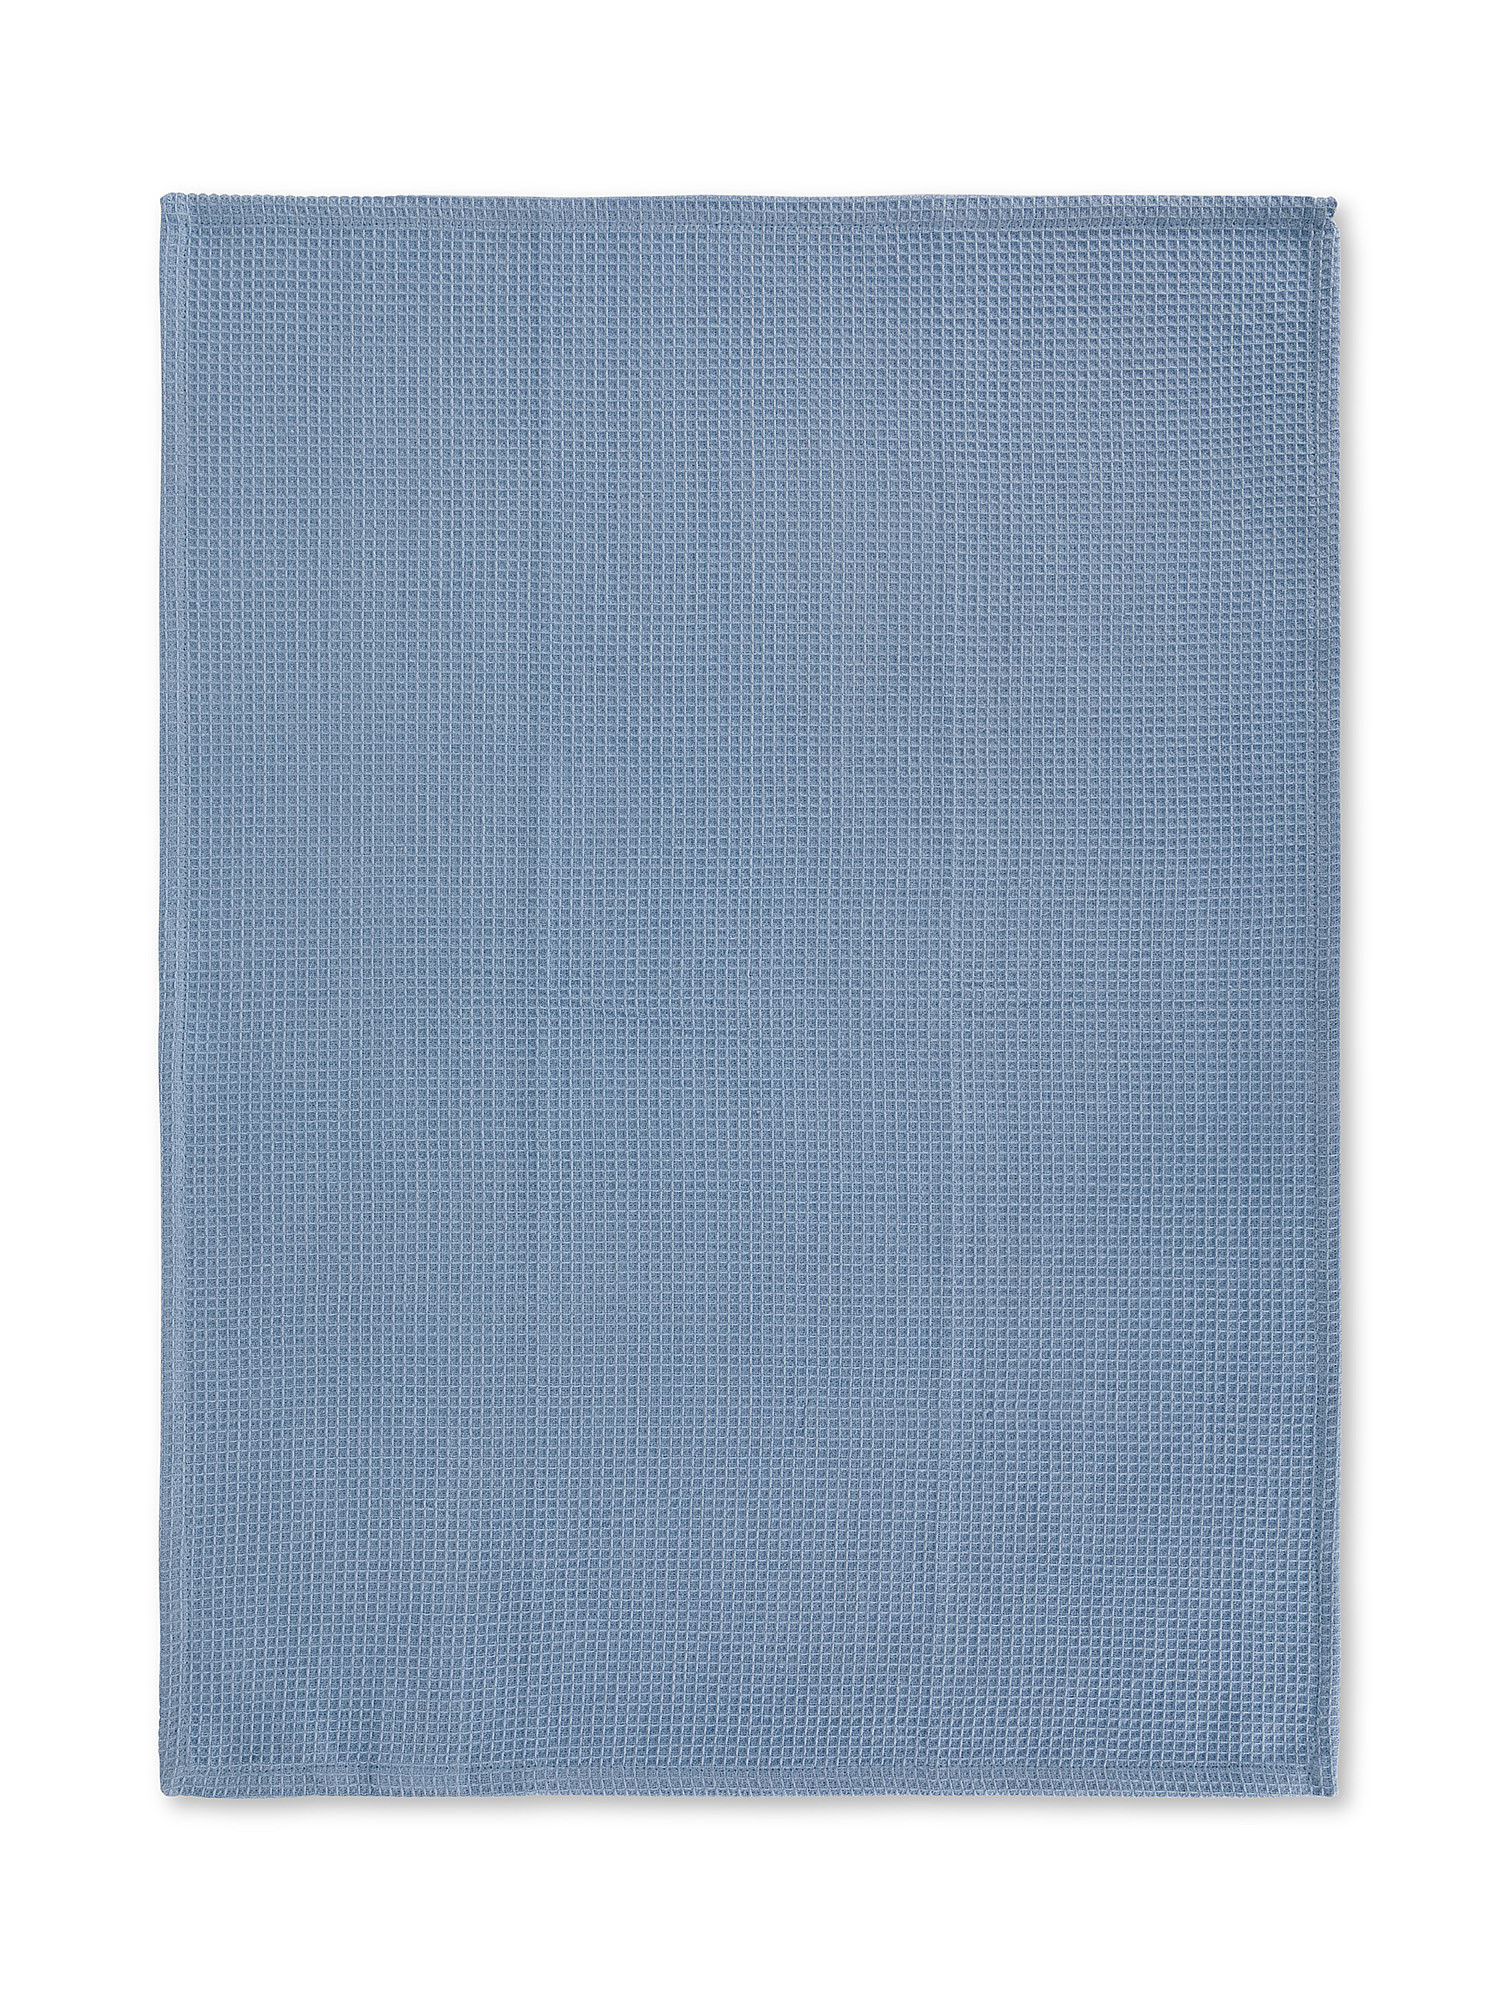 Set of 3 tea towels in 100% cotton with marine print, Light Blue, large image number 2